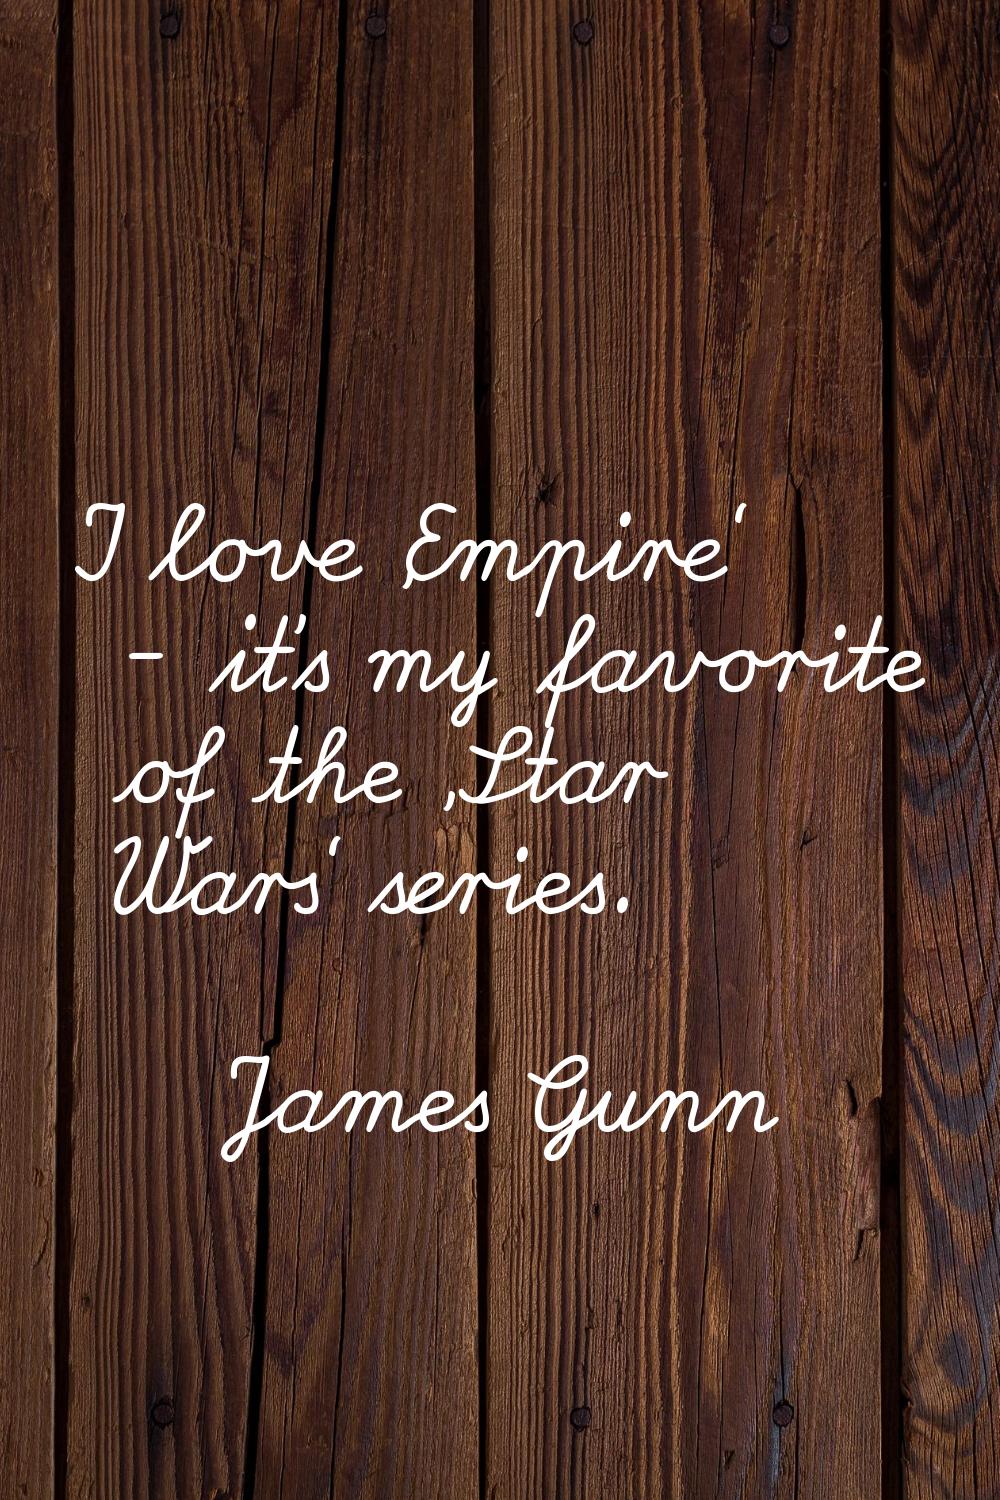 I love 'Empire' - it's my favorite of the 'Star Wars' series.